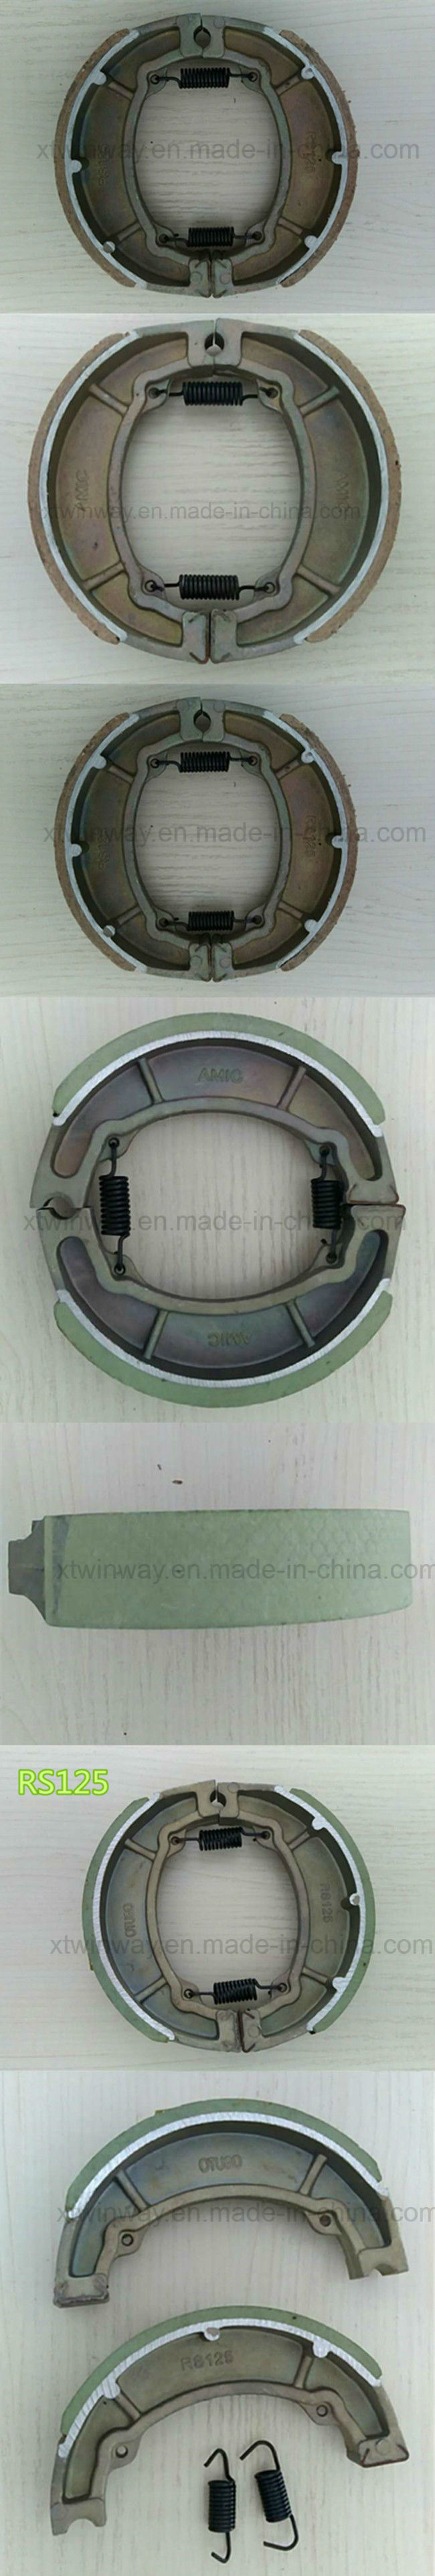 Ww-5118 25*120mm 220g Motorcycle Shoe Brake for RS125/Dx100